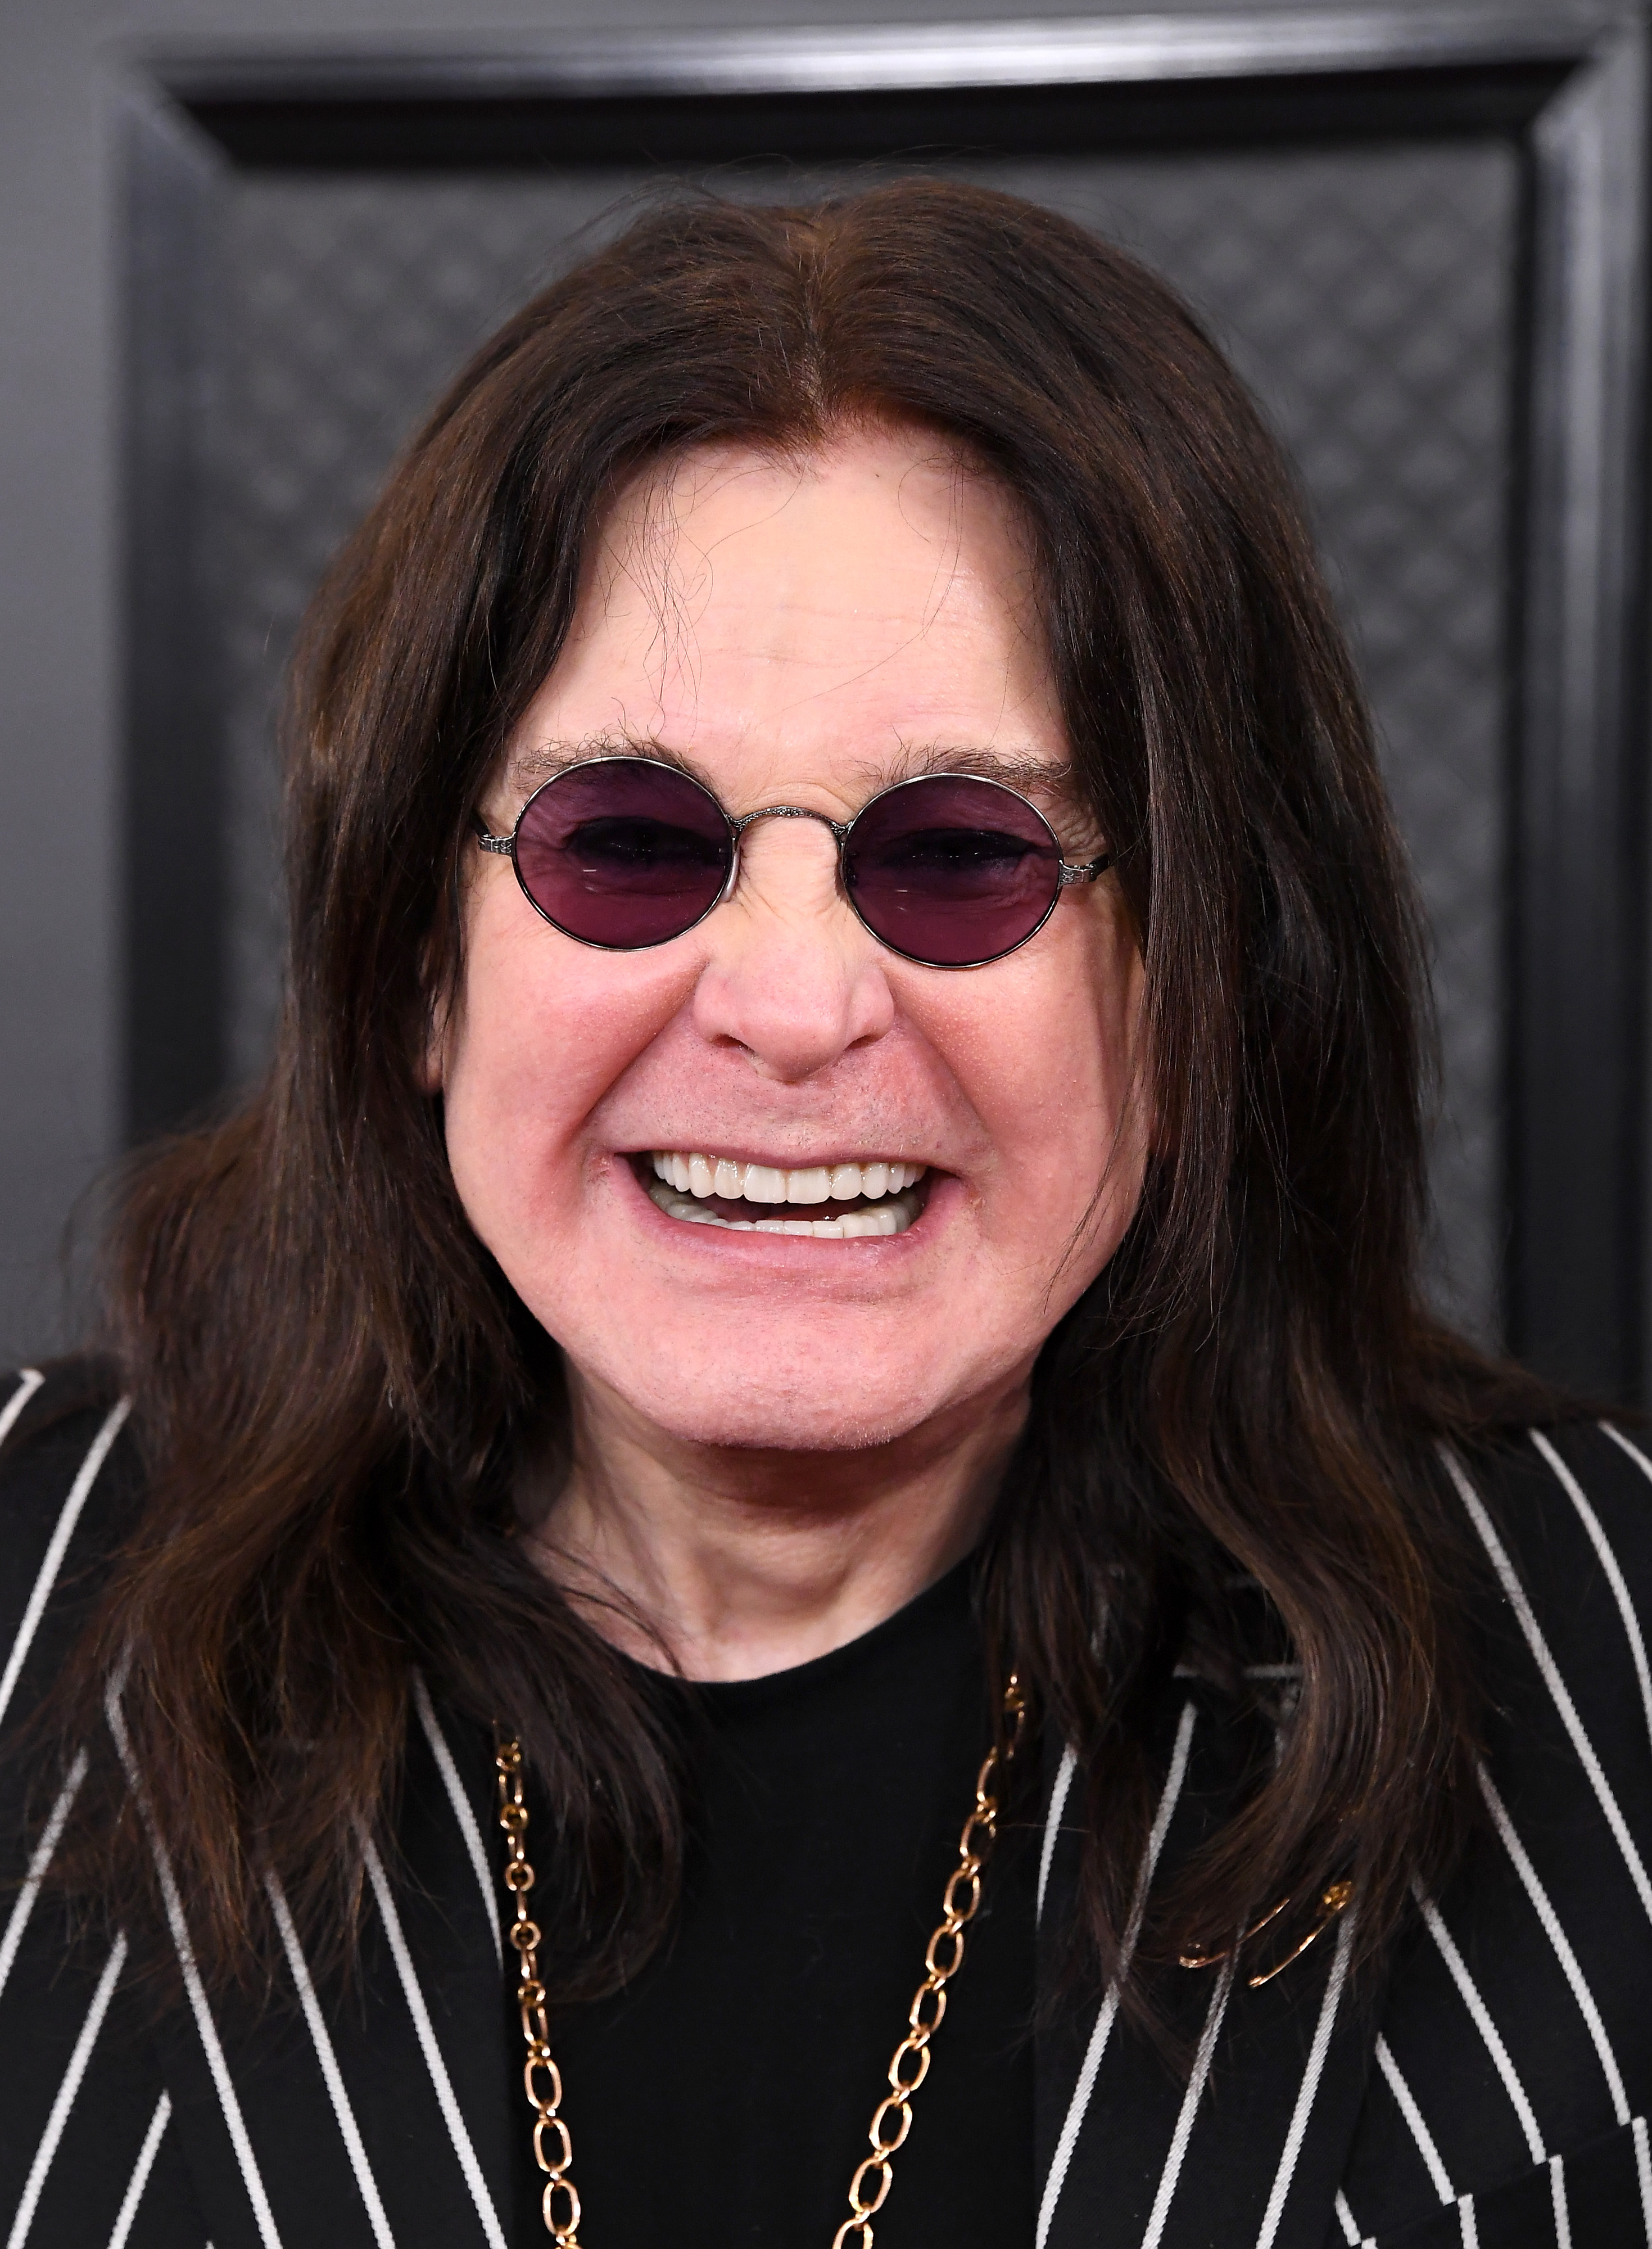 Ozzy Osbourne in Los Angeles, California on January 26, 2020 | Source: Getty Images